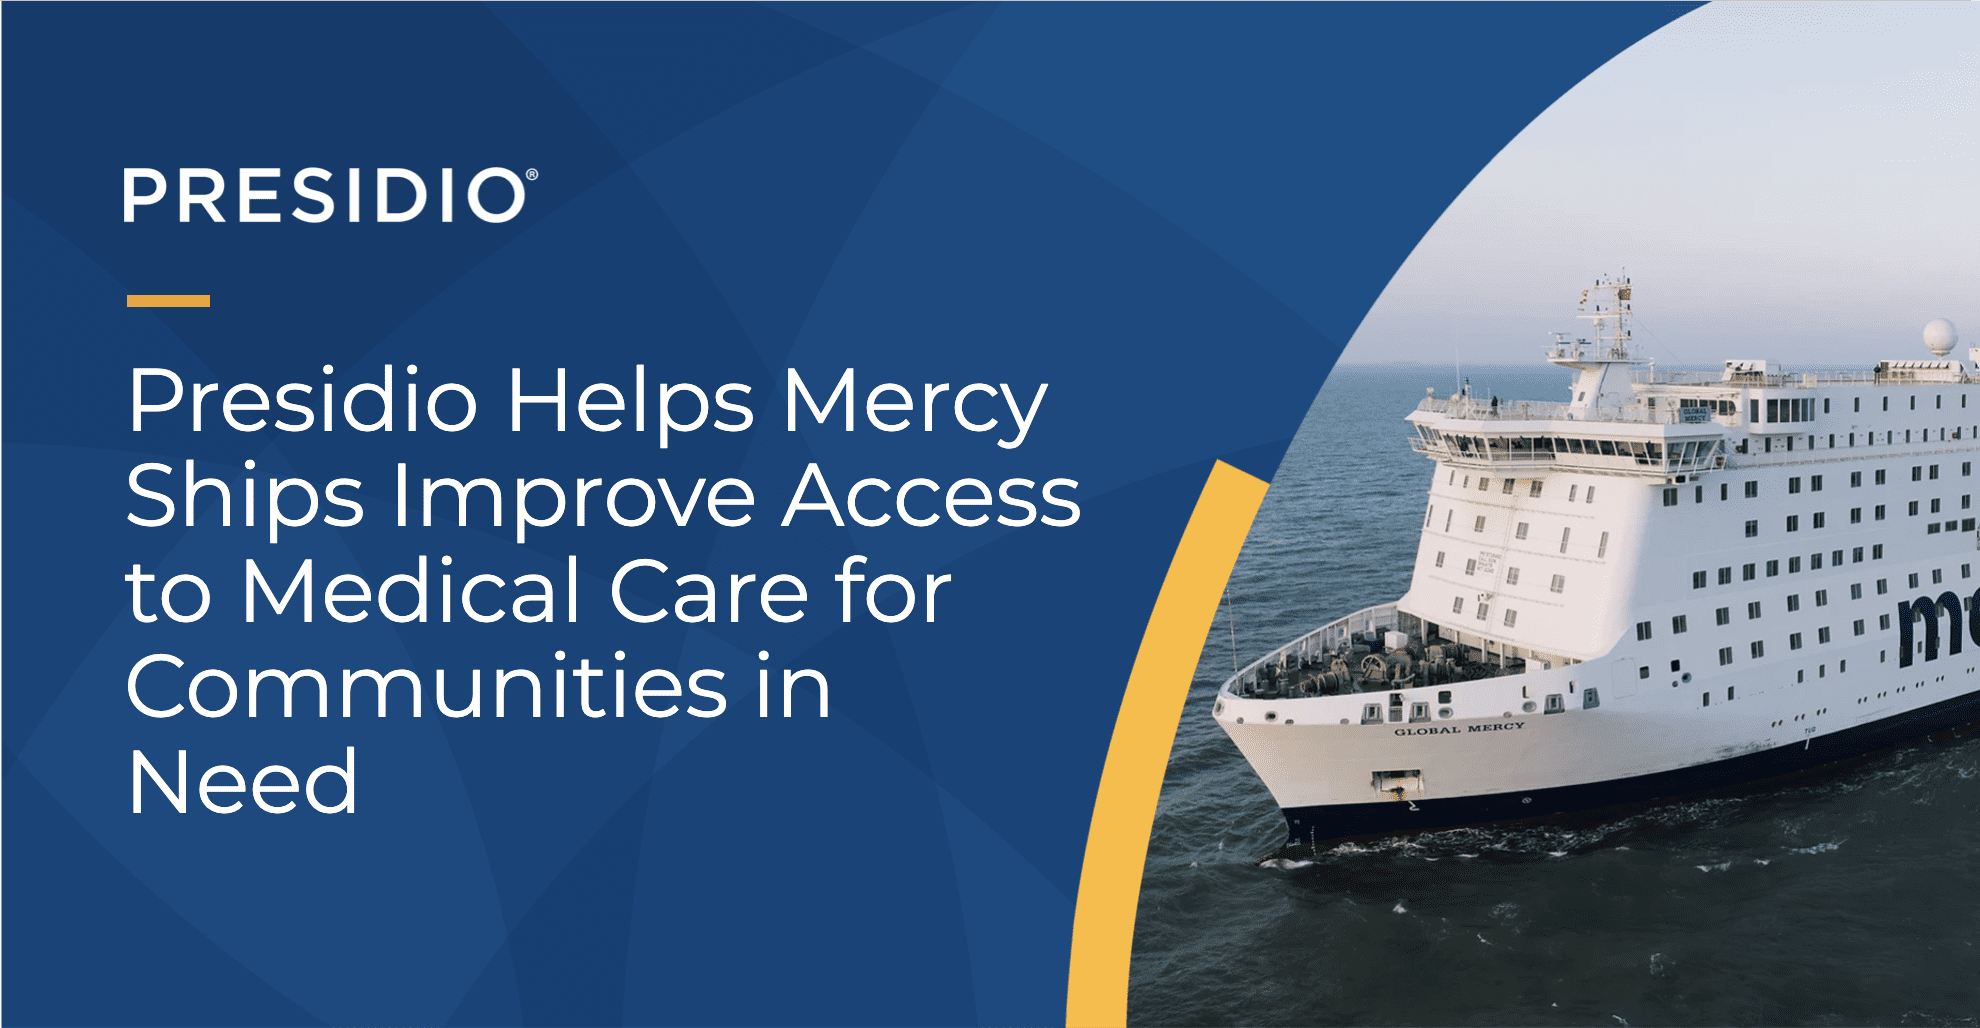 Presidio Helps Mercy Ships access to Medical Care for Communities in need